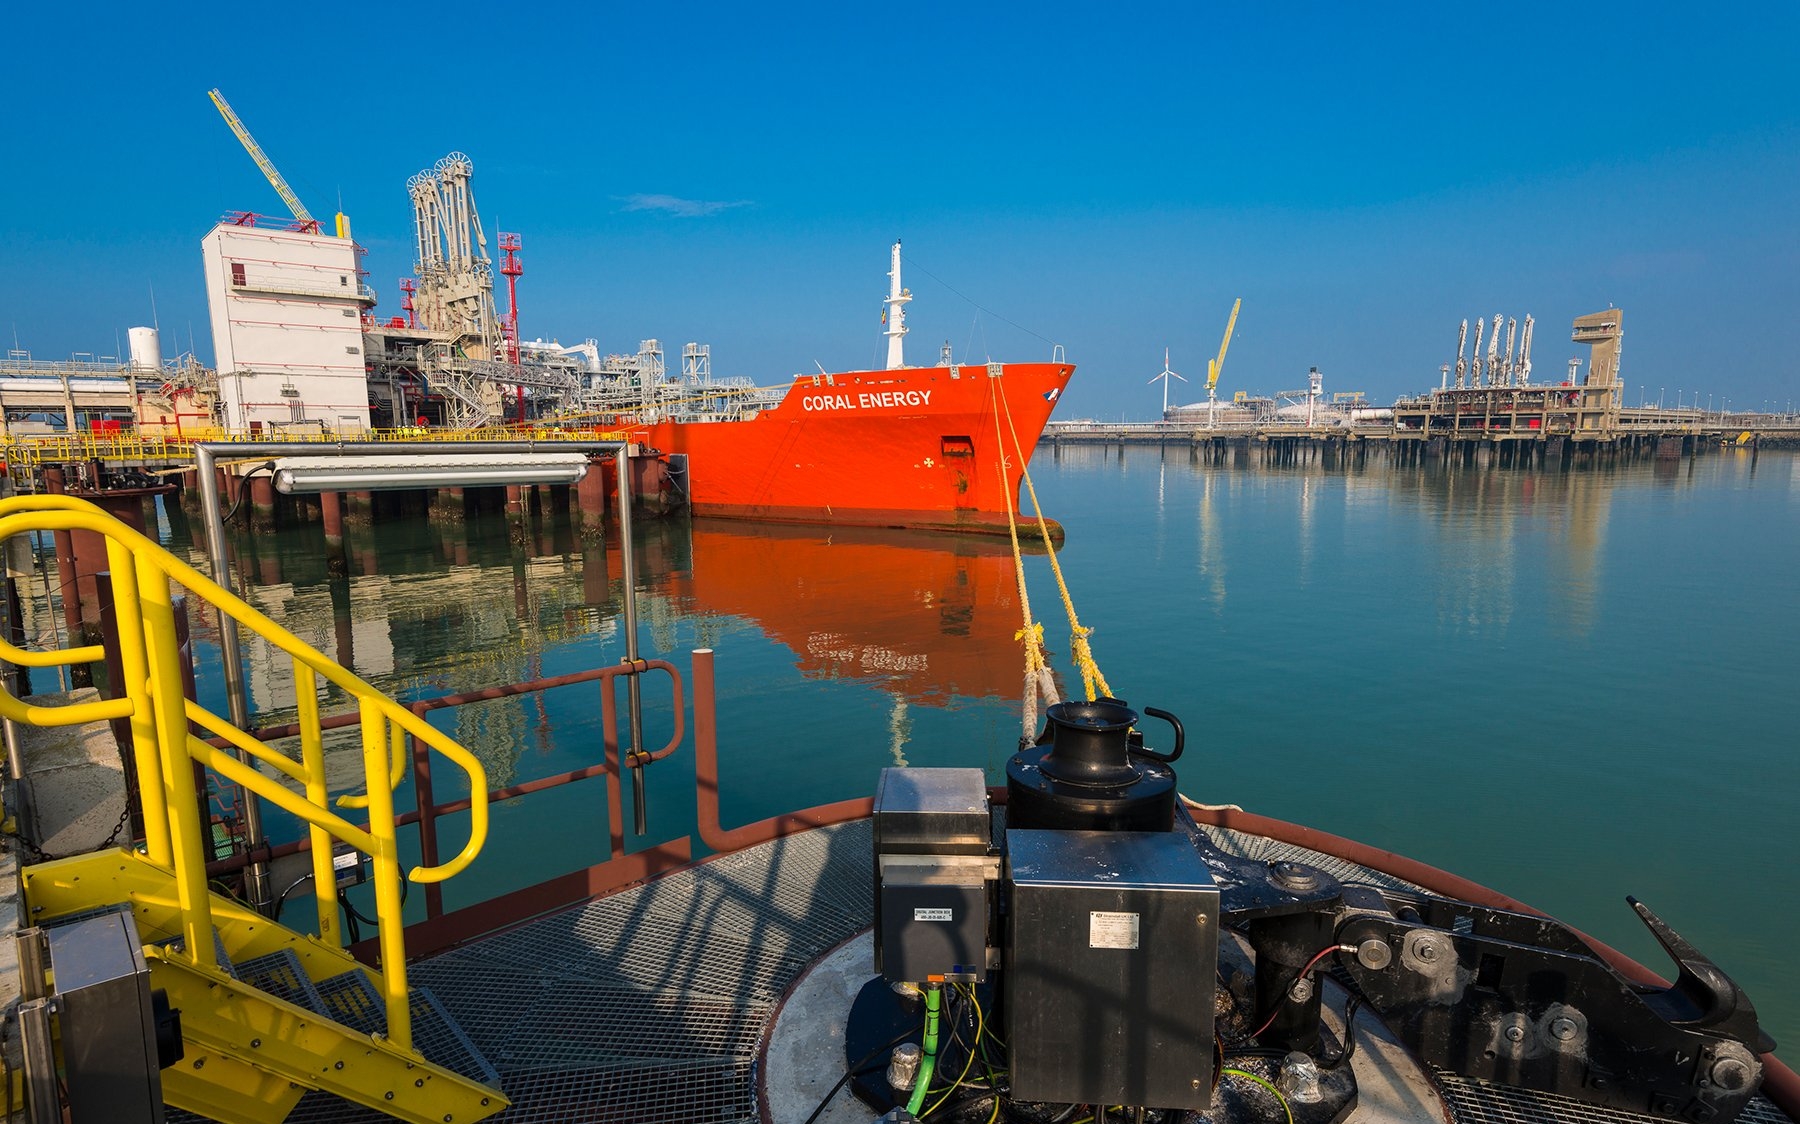 Fluxys reports record year-to-date activity at Zeebrugge LNG terminal